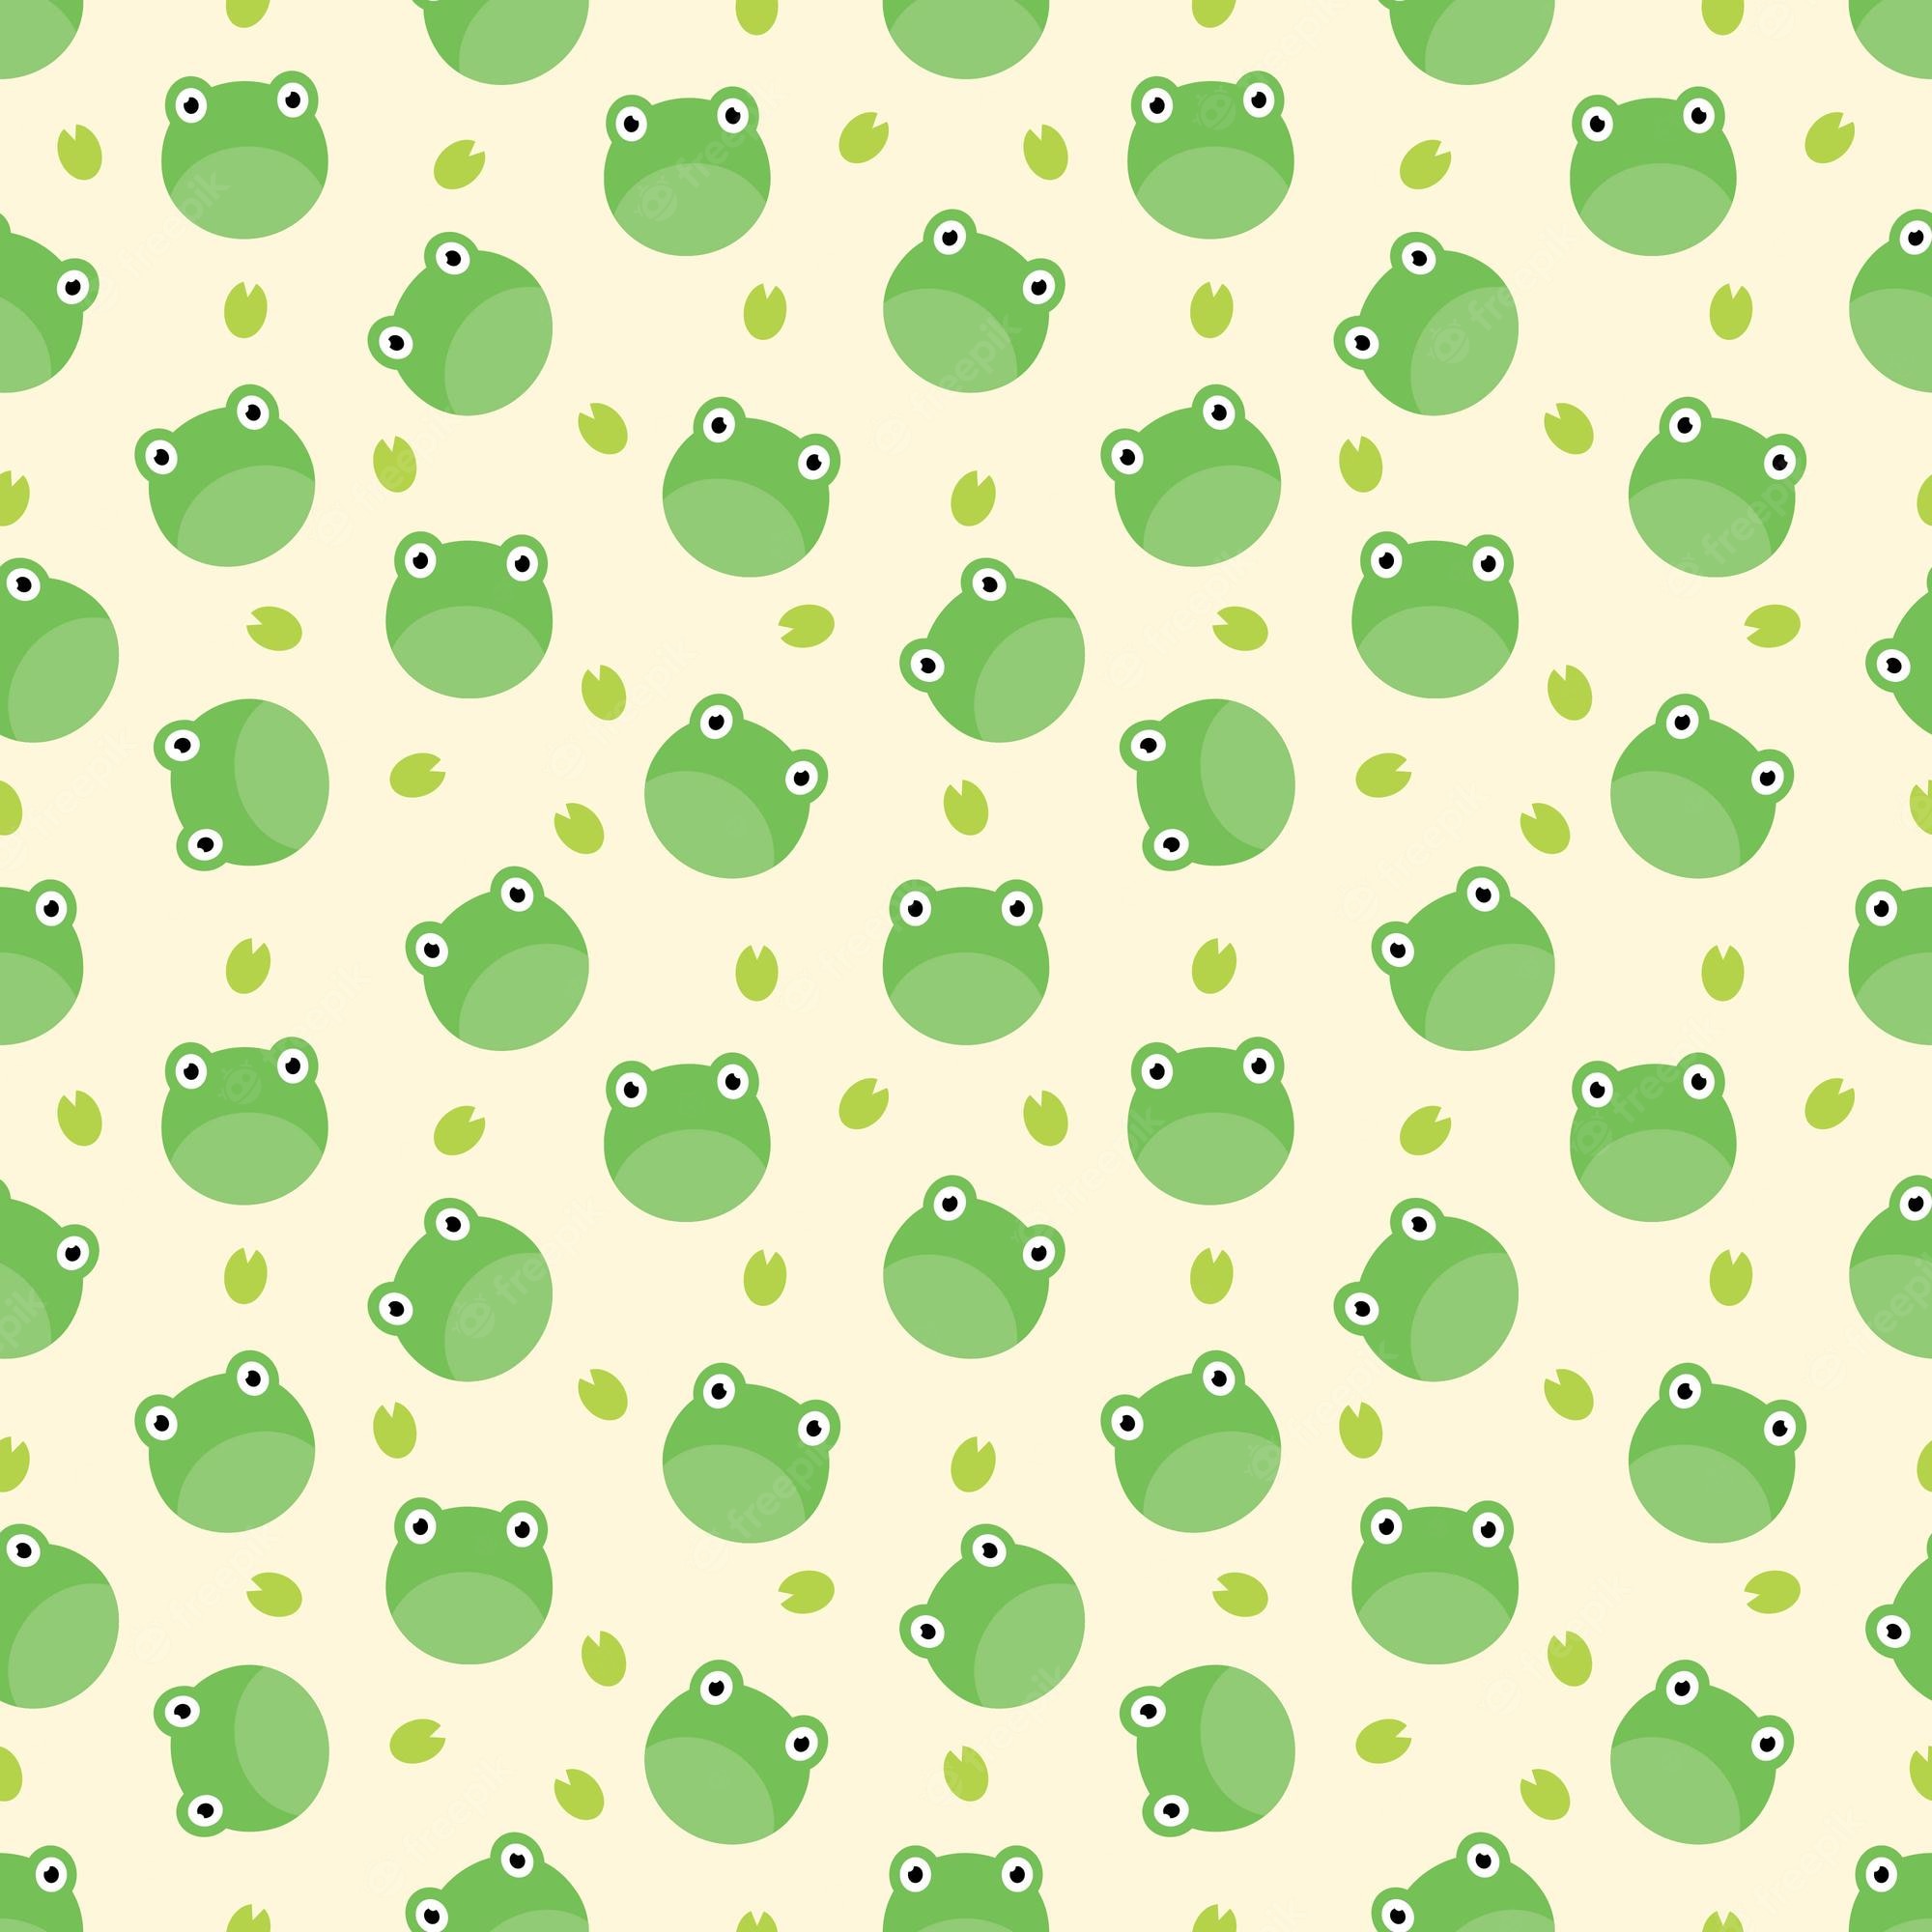 Cute frog Vectors & Illustrations for Free Download